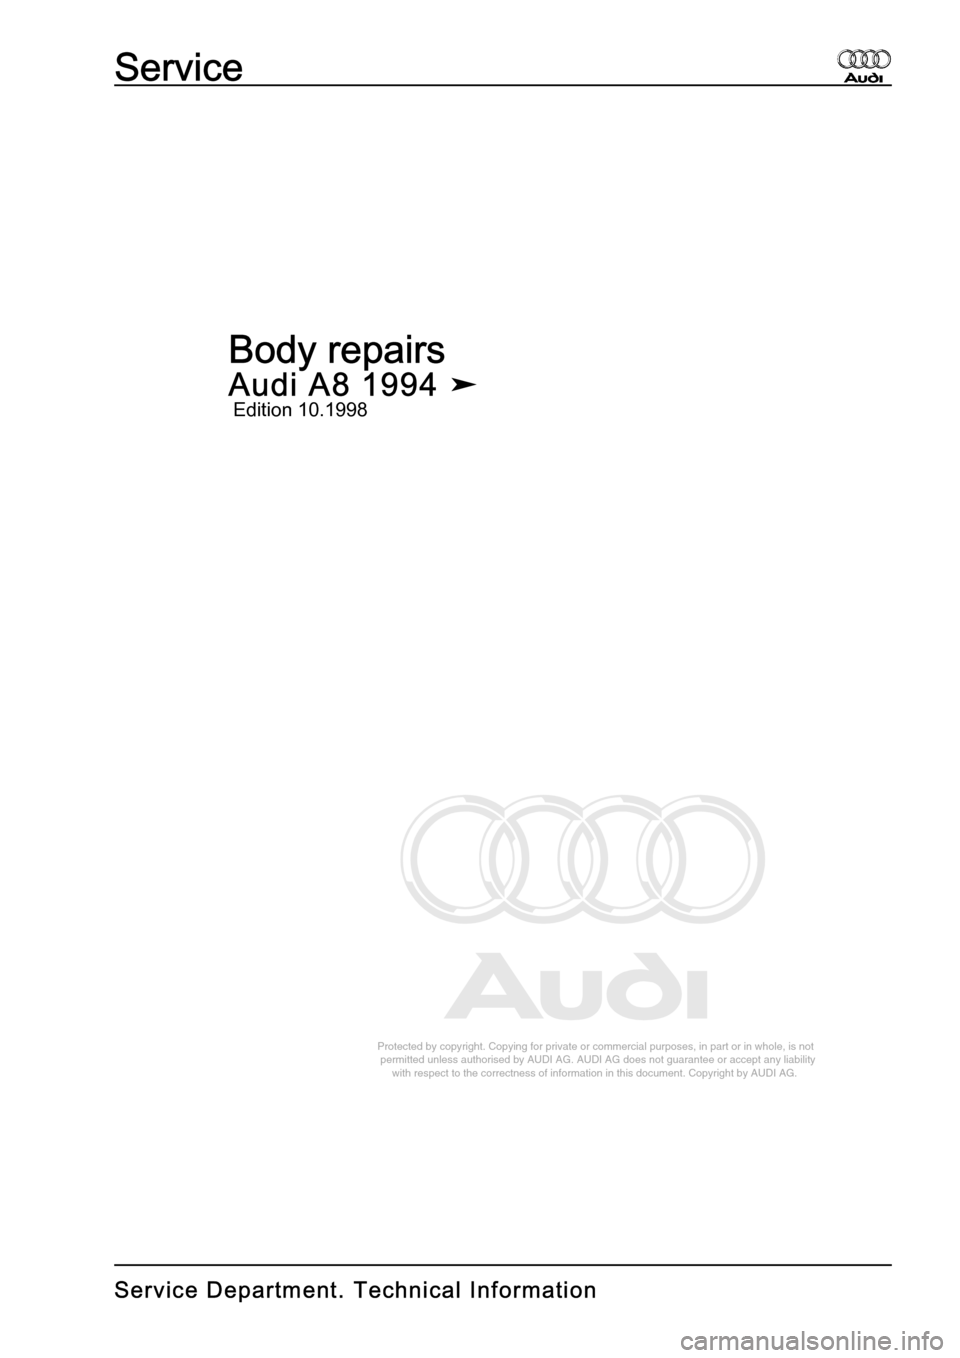 AUDI A8 1994 D4 / 1.G Body Repairs Workshop Manual 
Protected by copyright. Copying for private or commercial purposes, in p\
art or in whole, is not 
 permitted unless authorised by AUDI AG. AUDI AG does not guarantee or a\
ccept any liability 
     